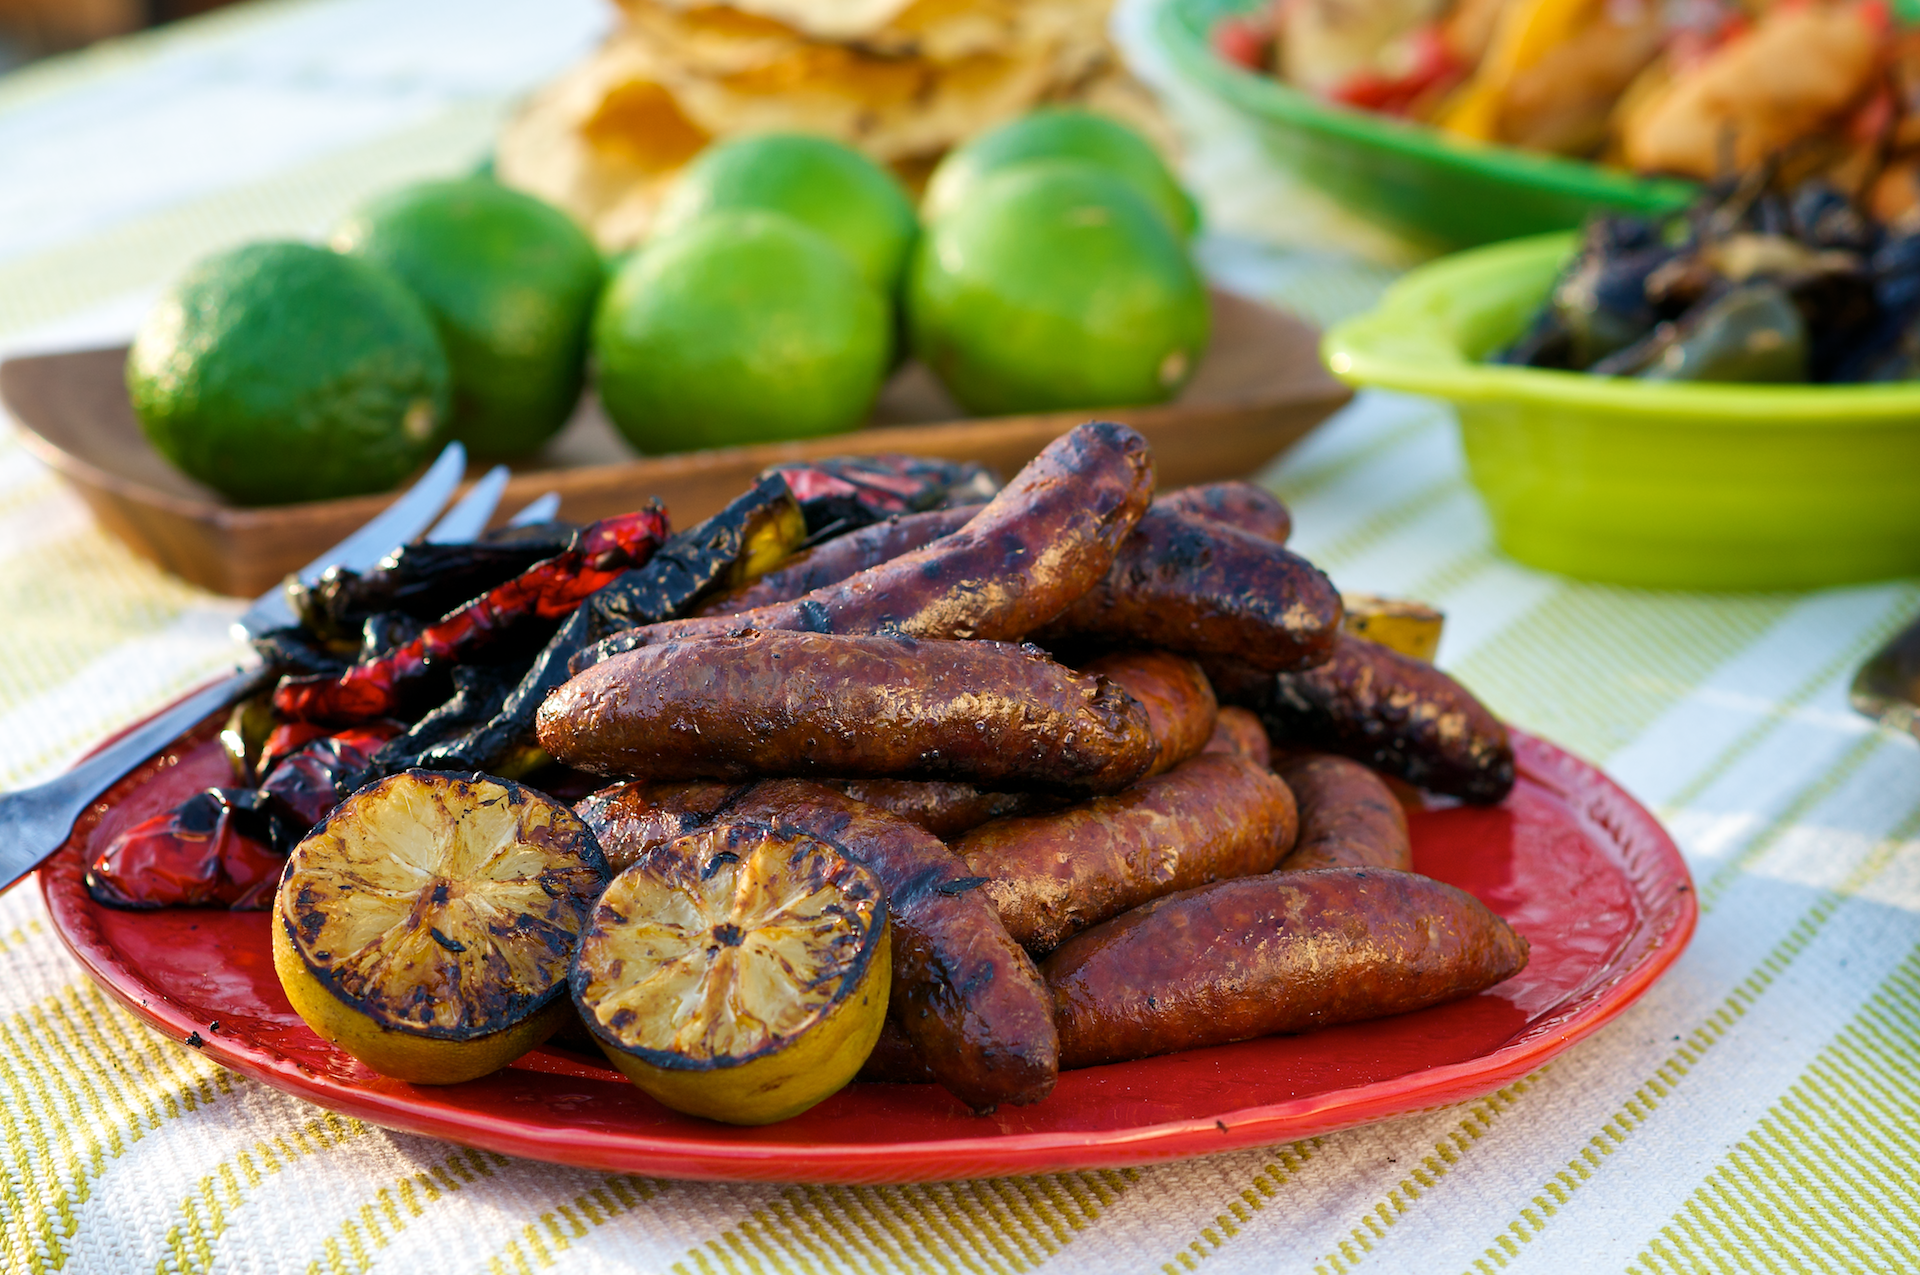 Marinating the chorizo in a dark Mexican beer renders the meat more delicate and adds a great malty flavor. You won't regret taking the time to marinade the meat!